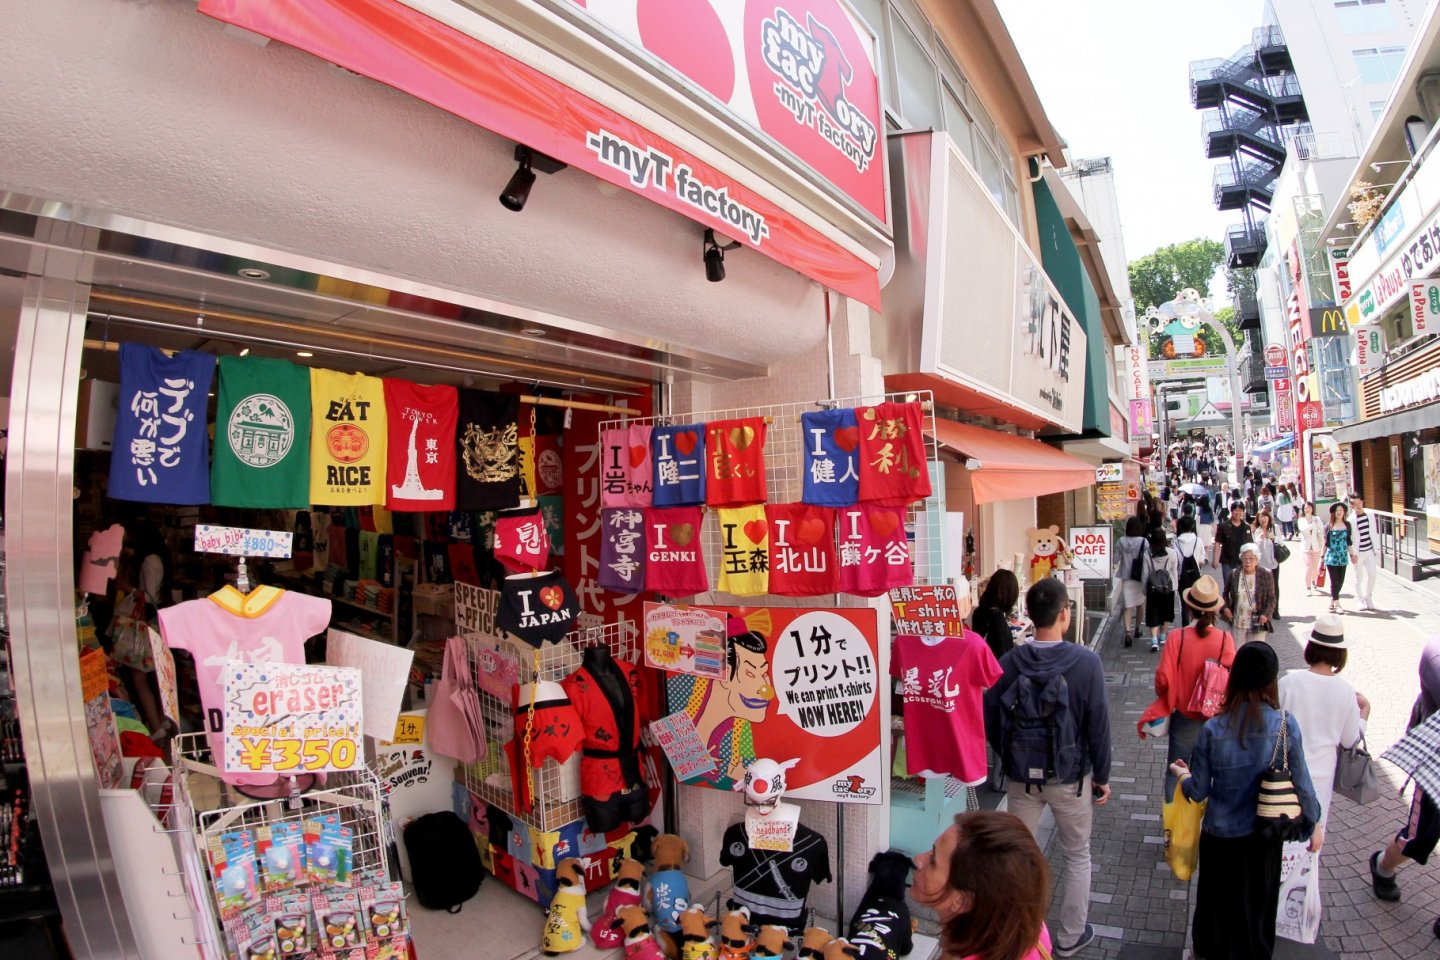 The shop is located just a few short steps from the entrance to the famous Takeshita Street in Harajuku, just across from the Harajuku JR station. 